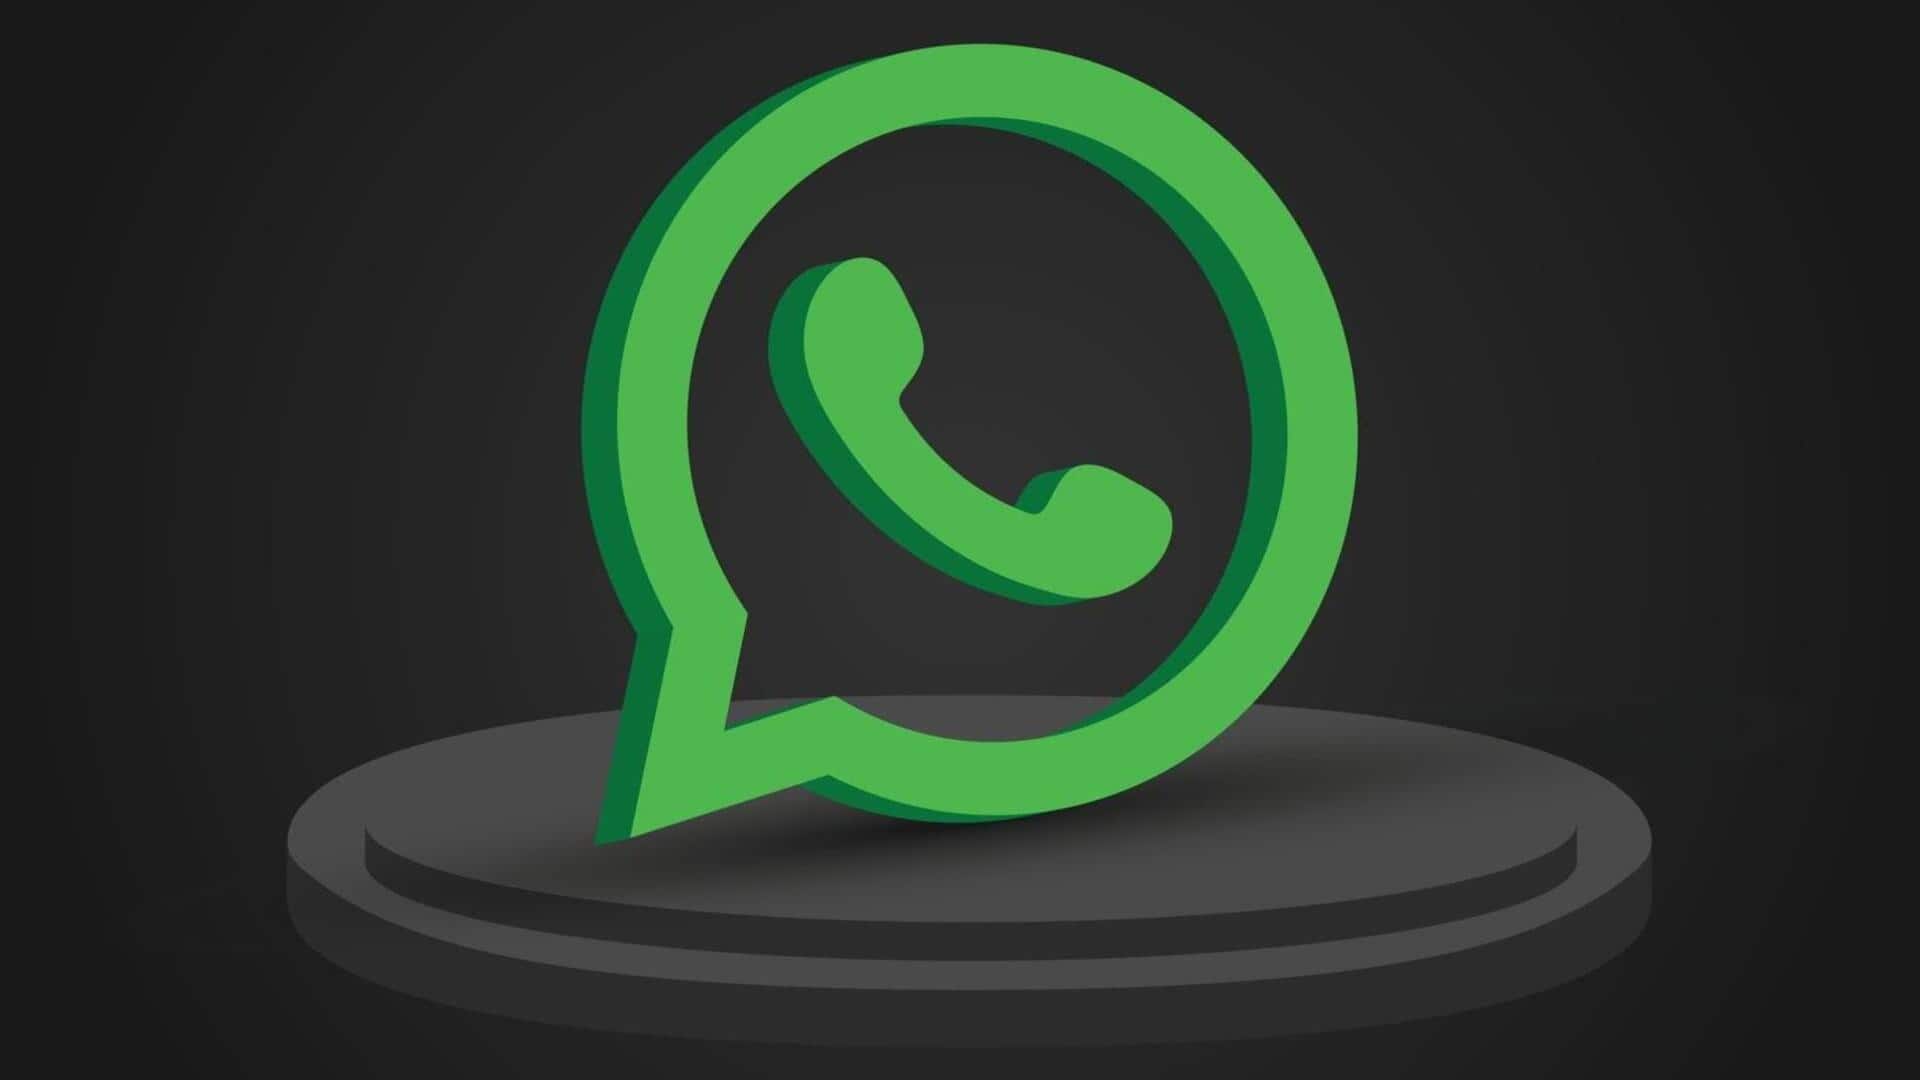 WhatsApp rolls out video messages and screen-sharing for iOS users